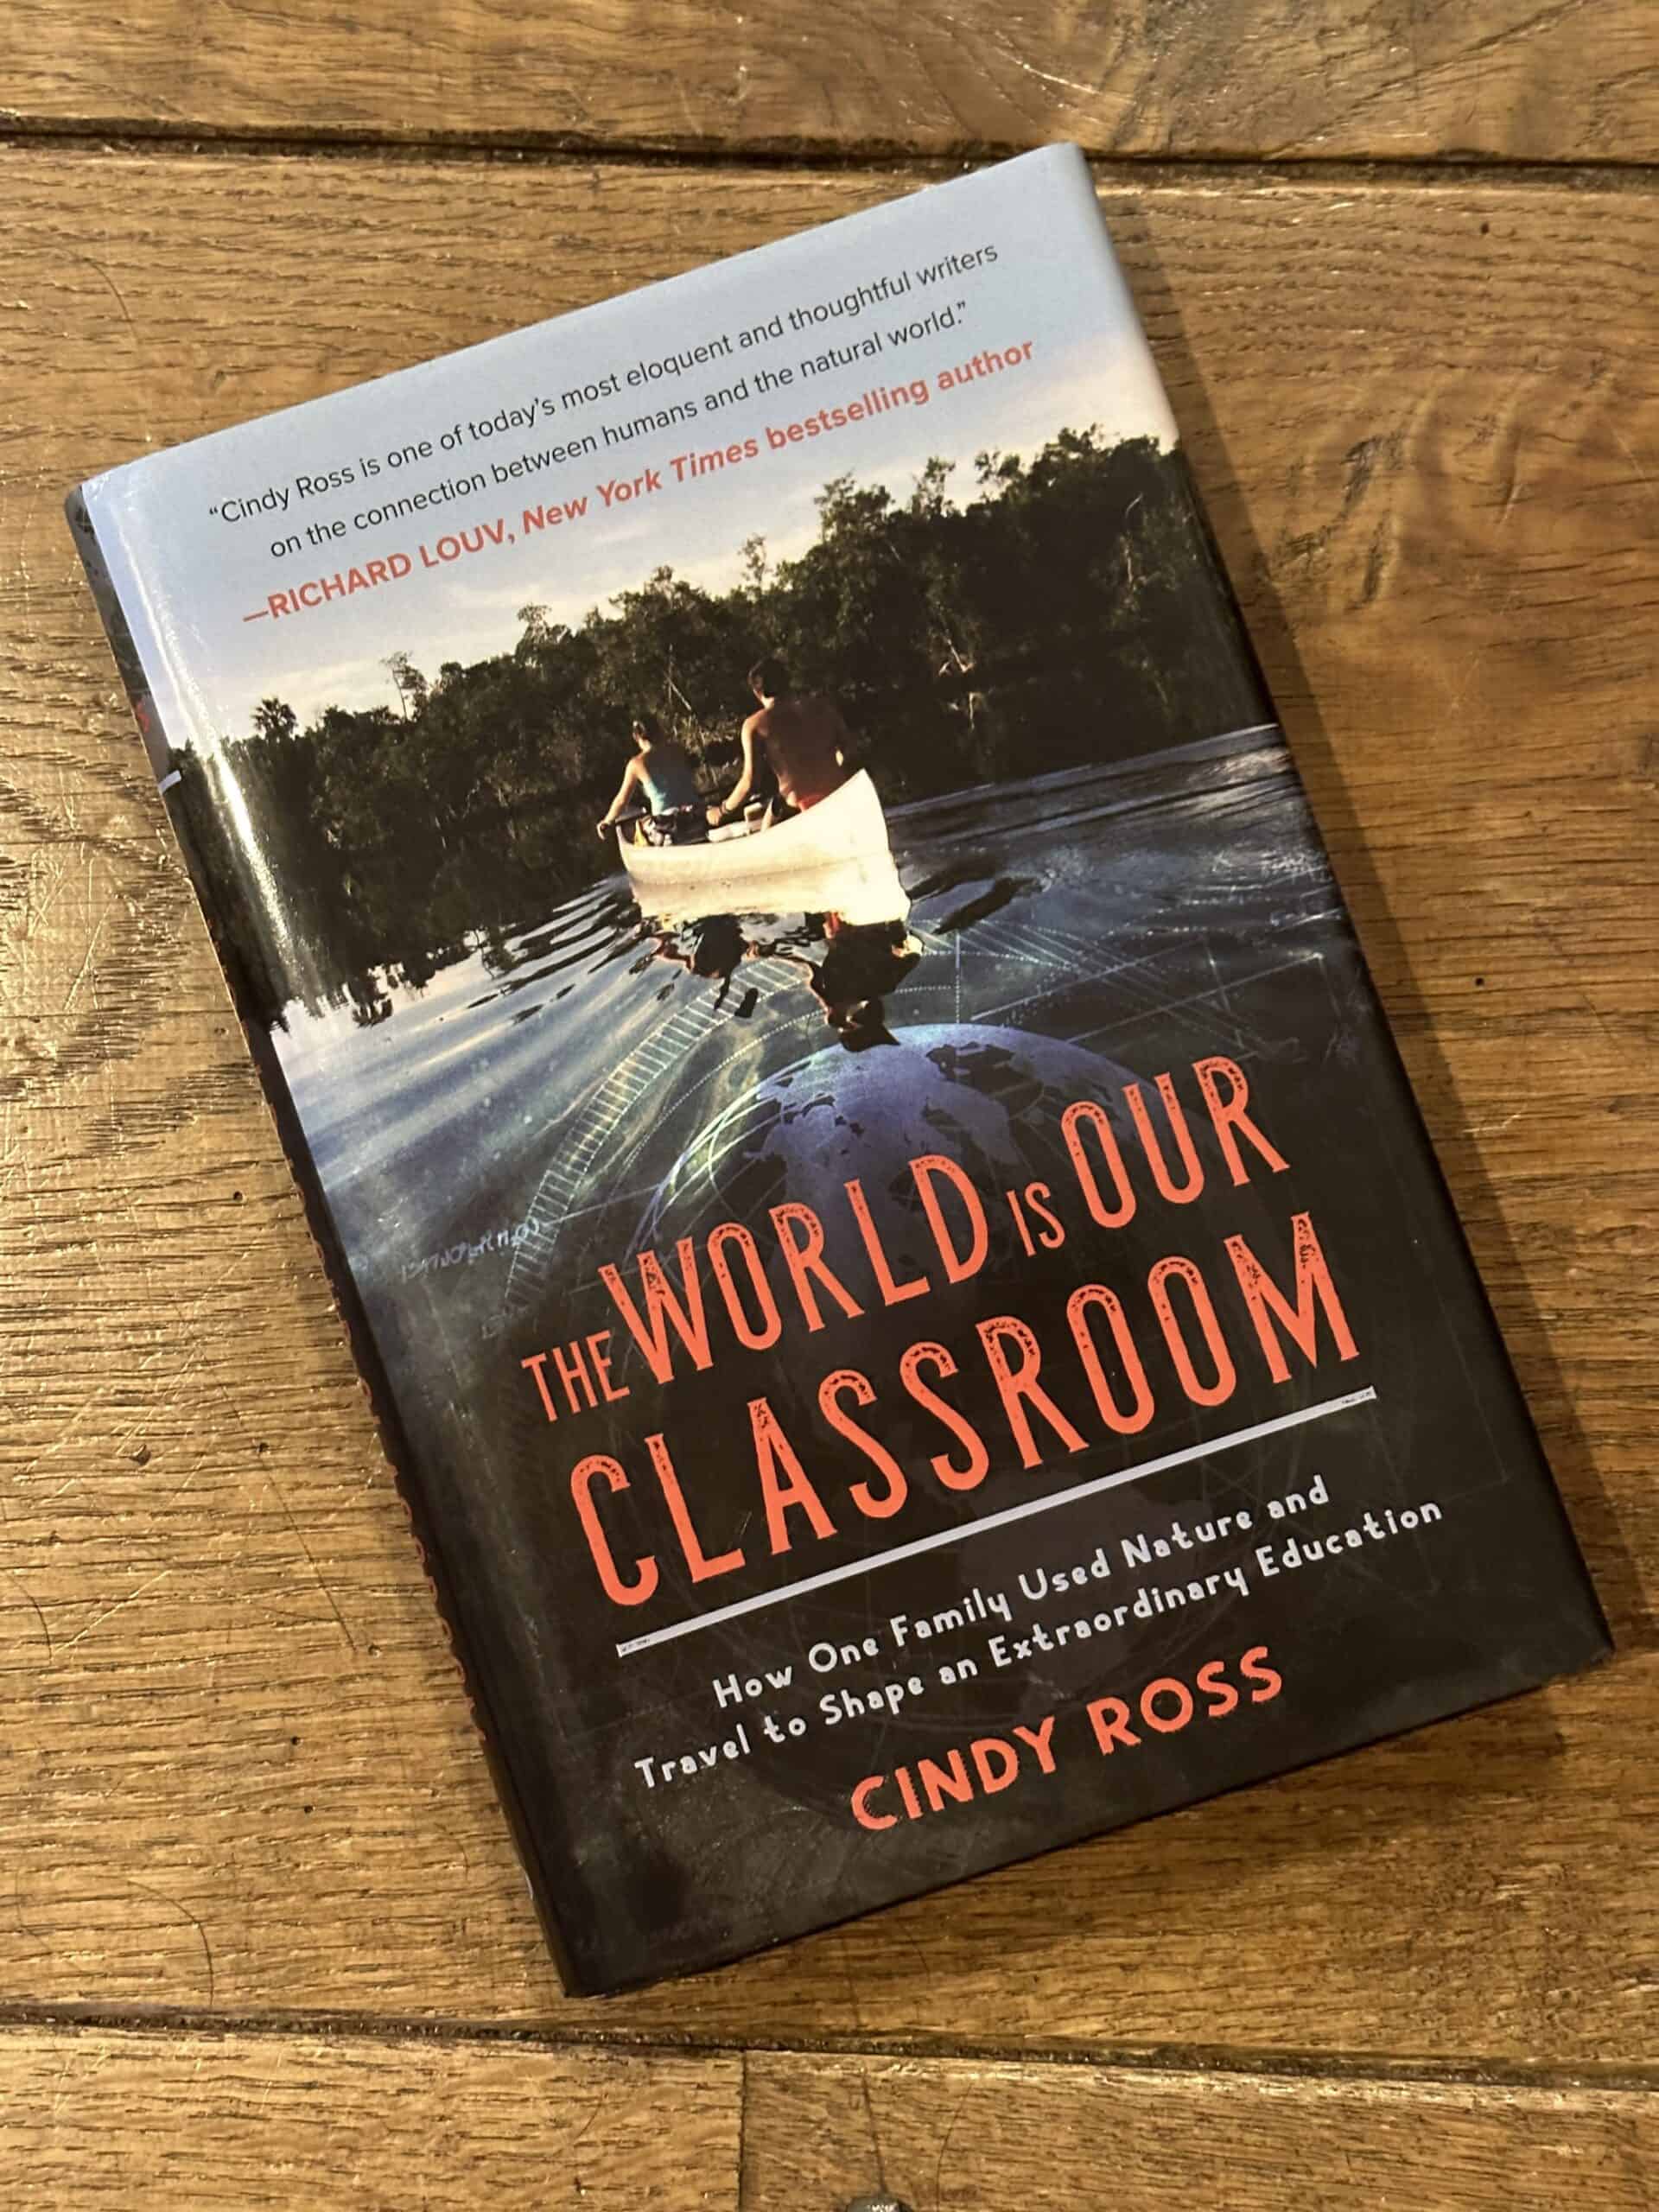 Cover of the book by Cindy Ross, "The World is Our Classroom"